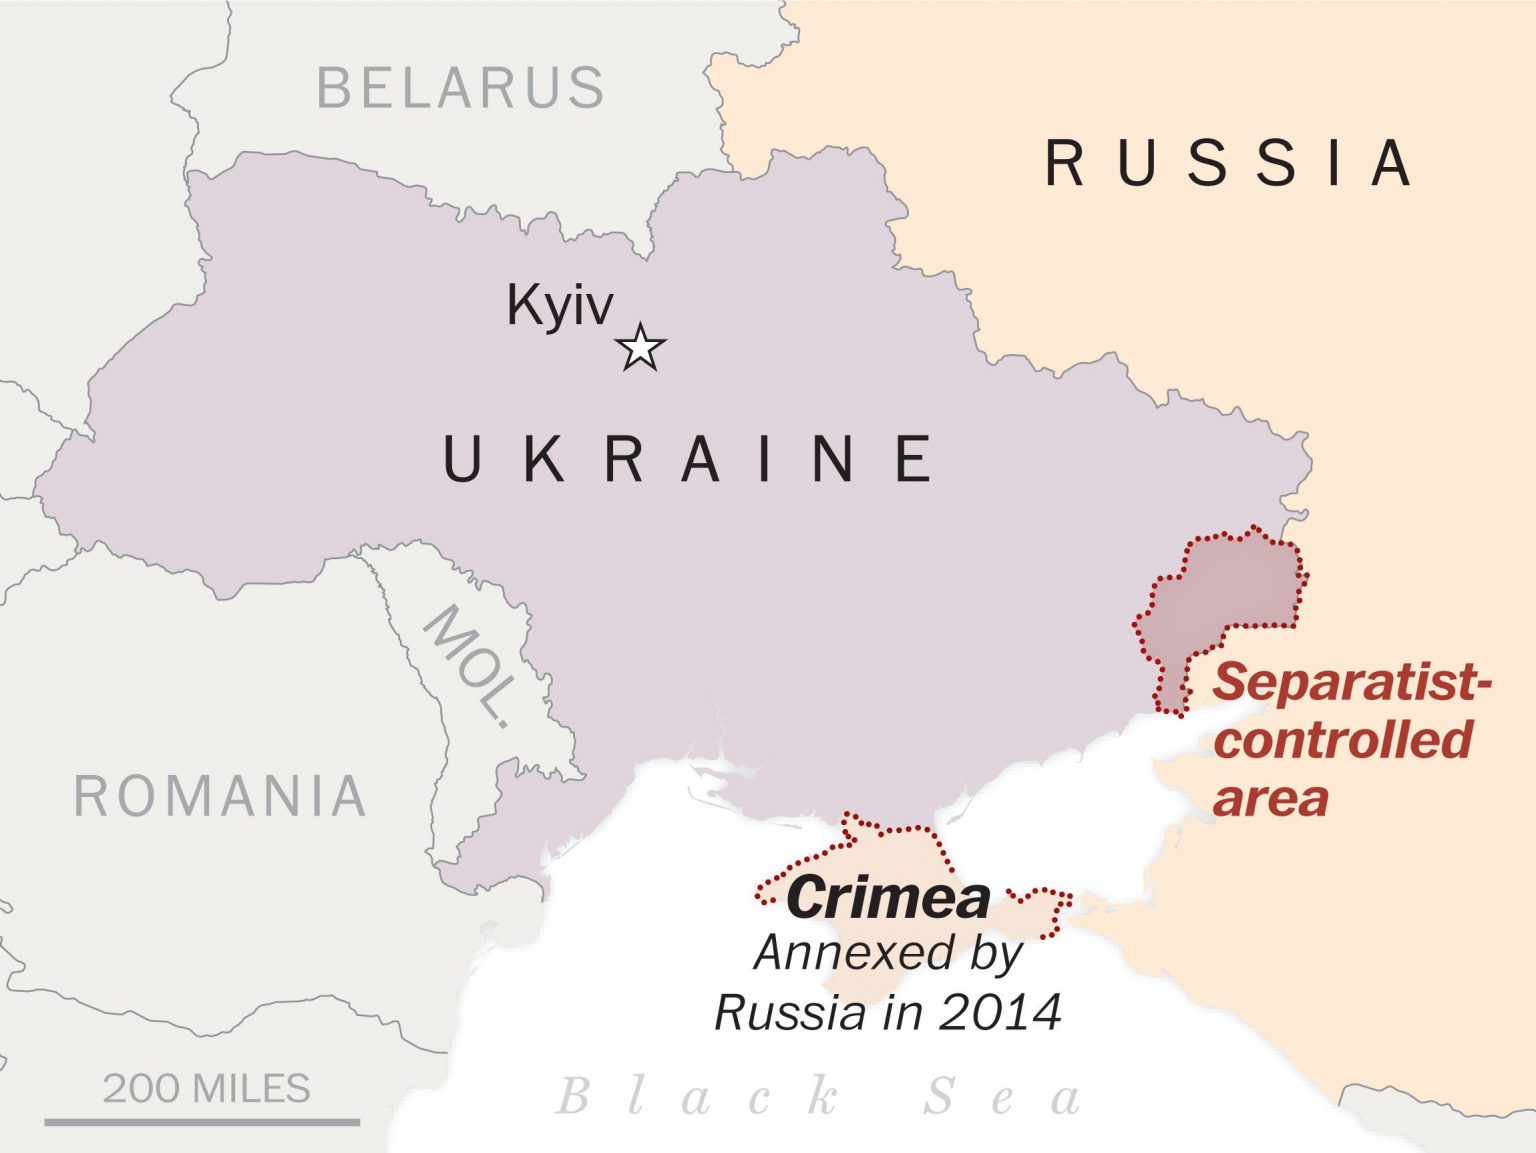 What the Ukraine-Russia Conflict is all